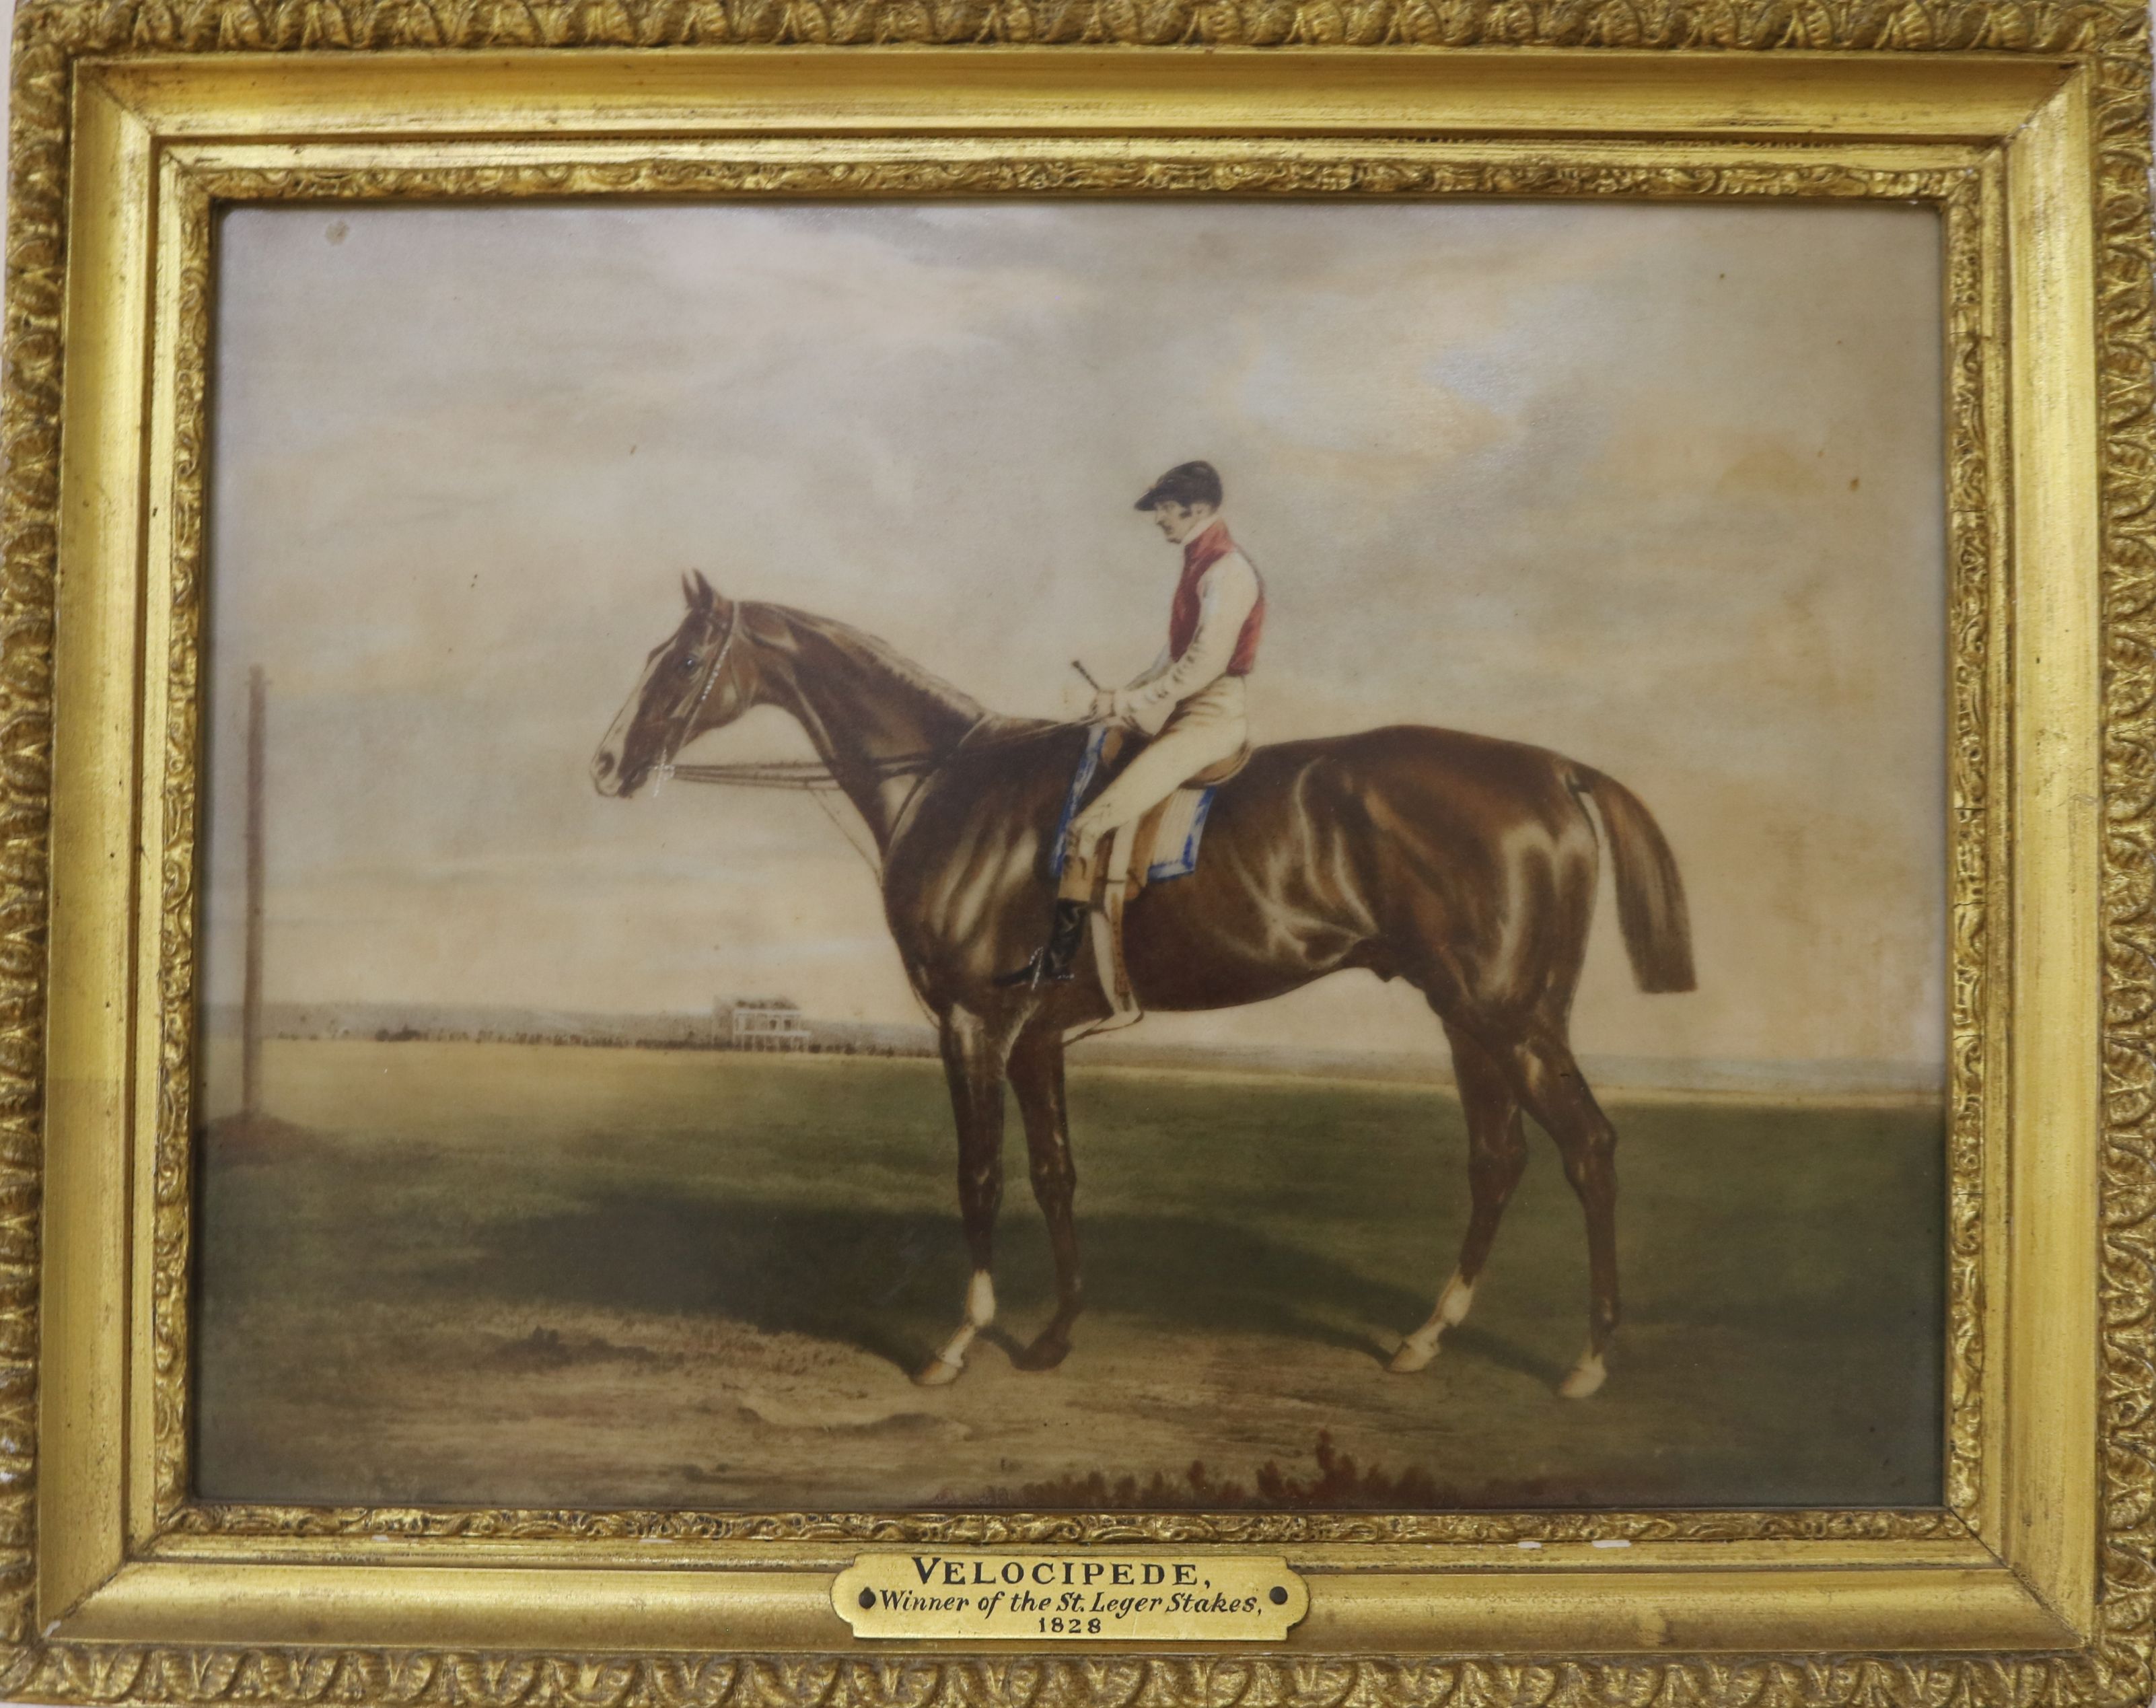 A Rosenthal printed plaque'Velocipede 1828', winner of the St Ledger Stakes 182817 x 22.5cm